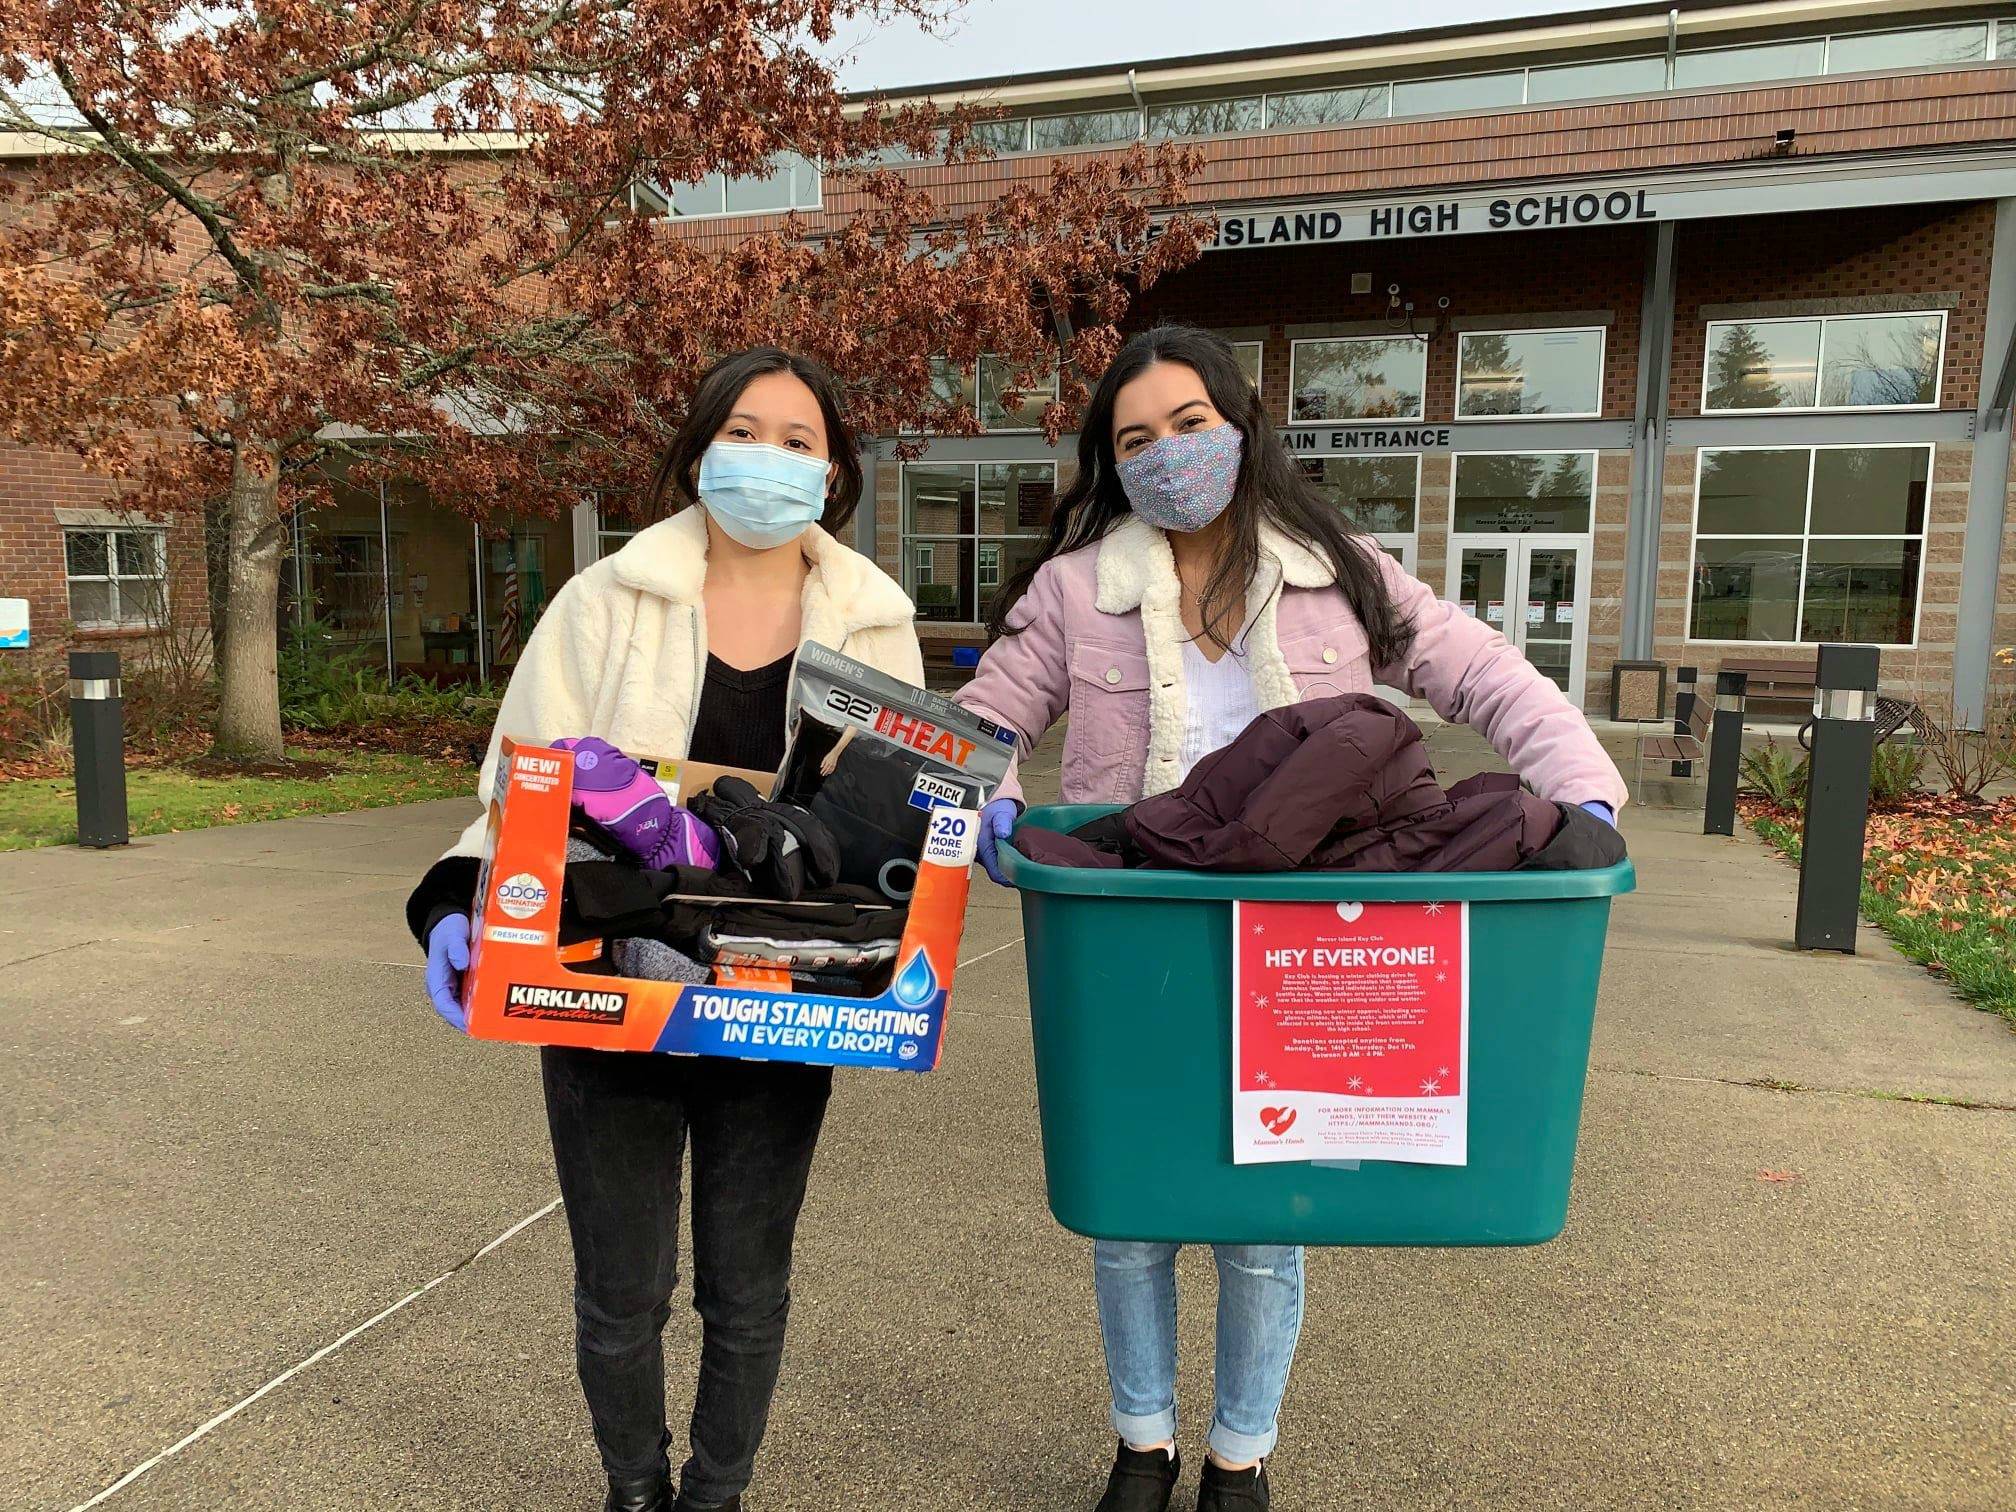 The Mercer Island High School Key Club ran a successful warm clothing donation drive to benefit Mamma’s Hands, which serves homeless families on the Eastside. Last month, the student service club, which is sponsored by the Mercer Island Kiwanis, collected socks, gloves, hats, pants and coats. Photo from the Mercer Island School District Facebook page